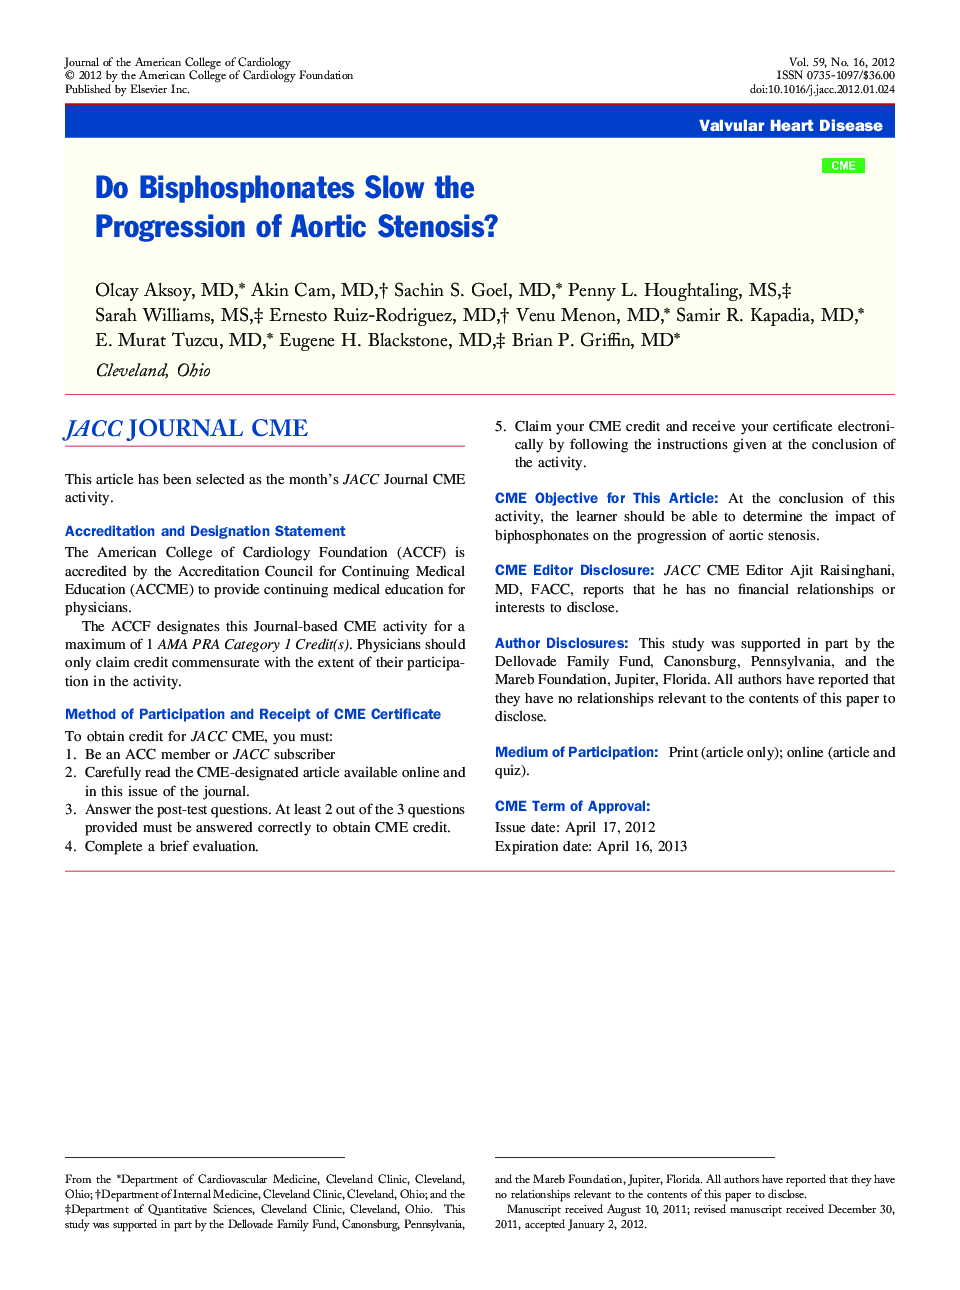 Do Bisphosphonates Slow the Progression of Aortic Stenosis? 